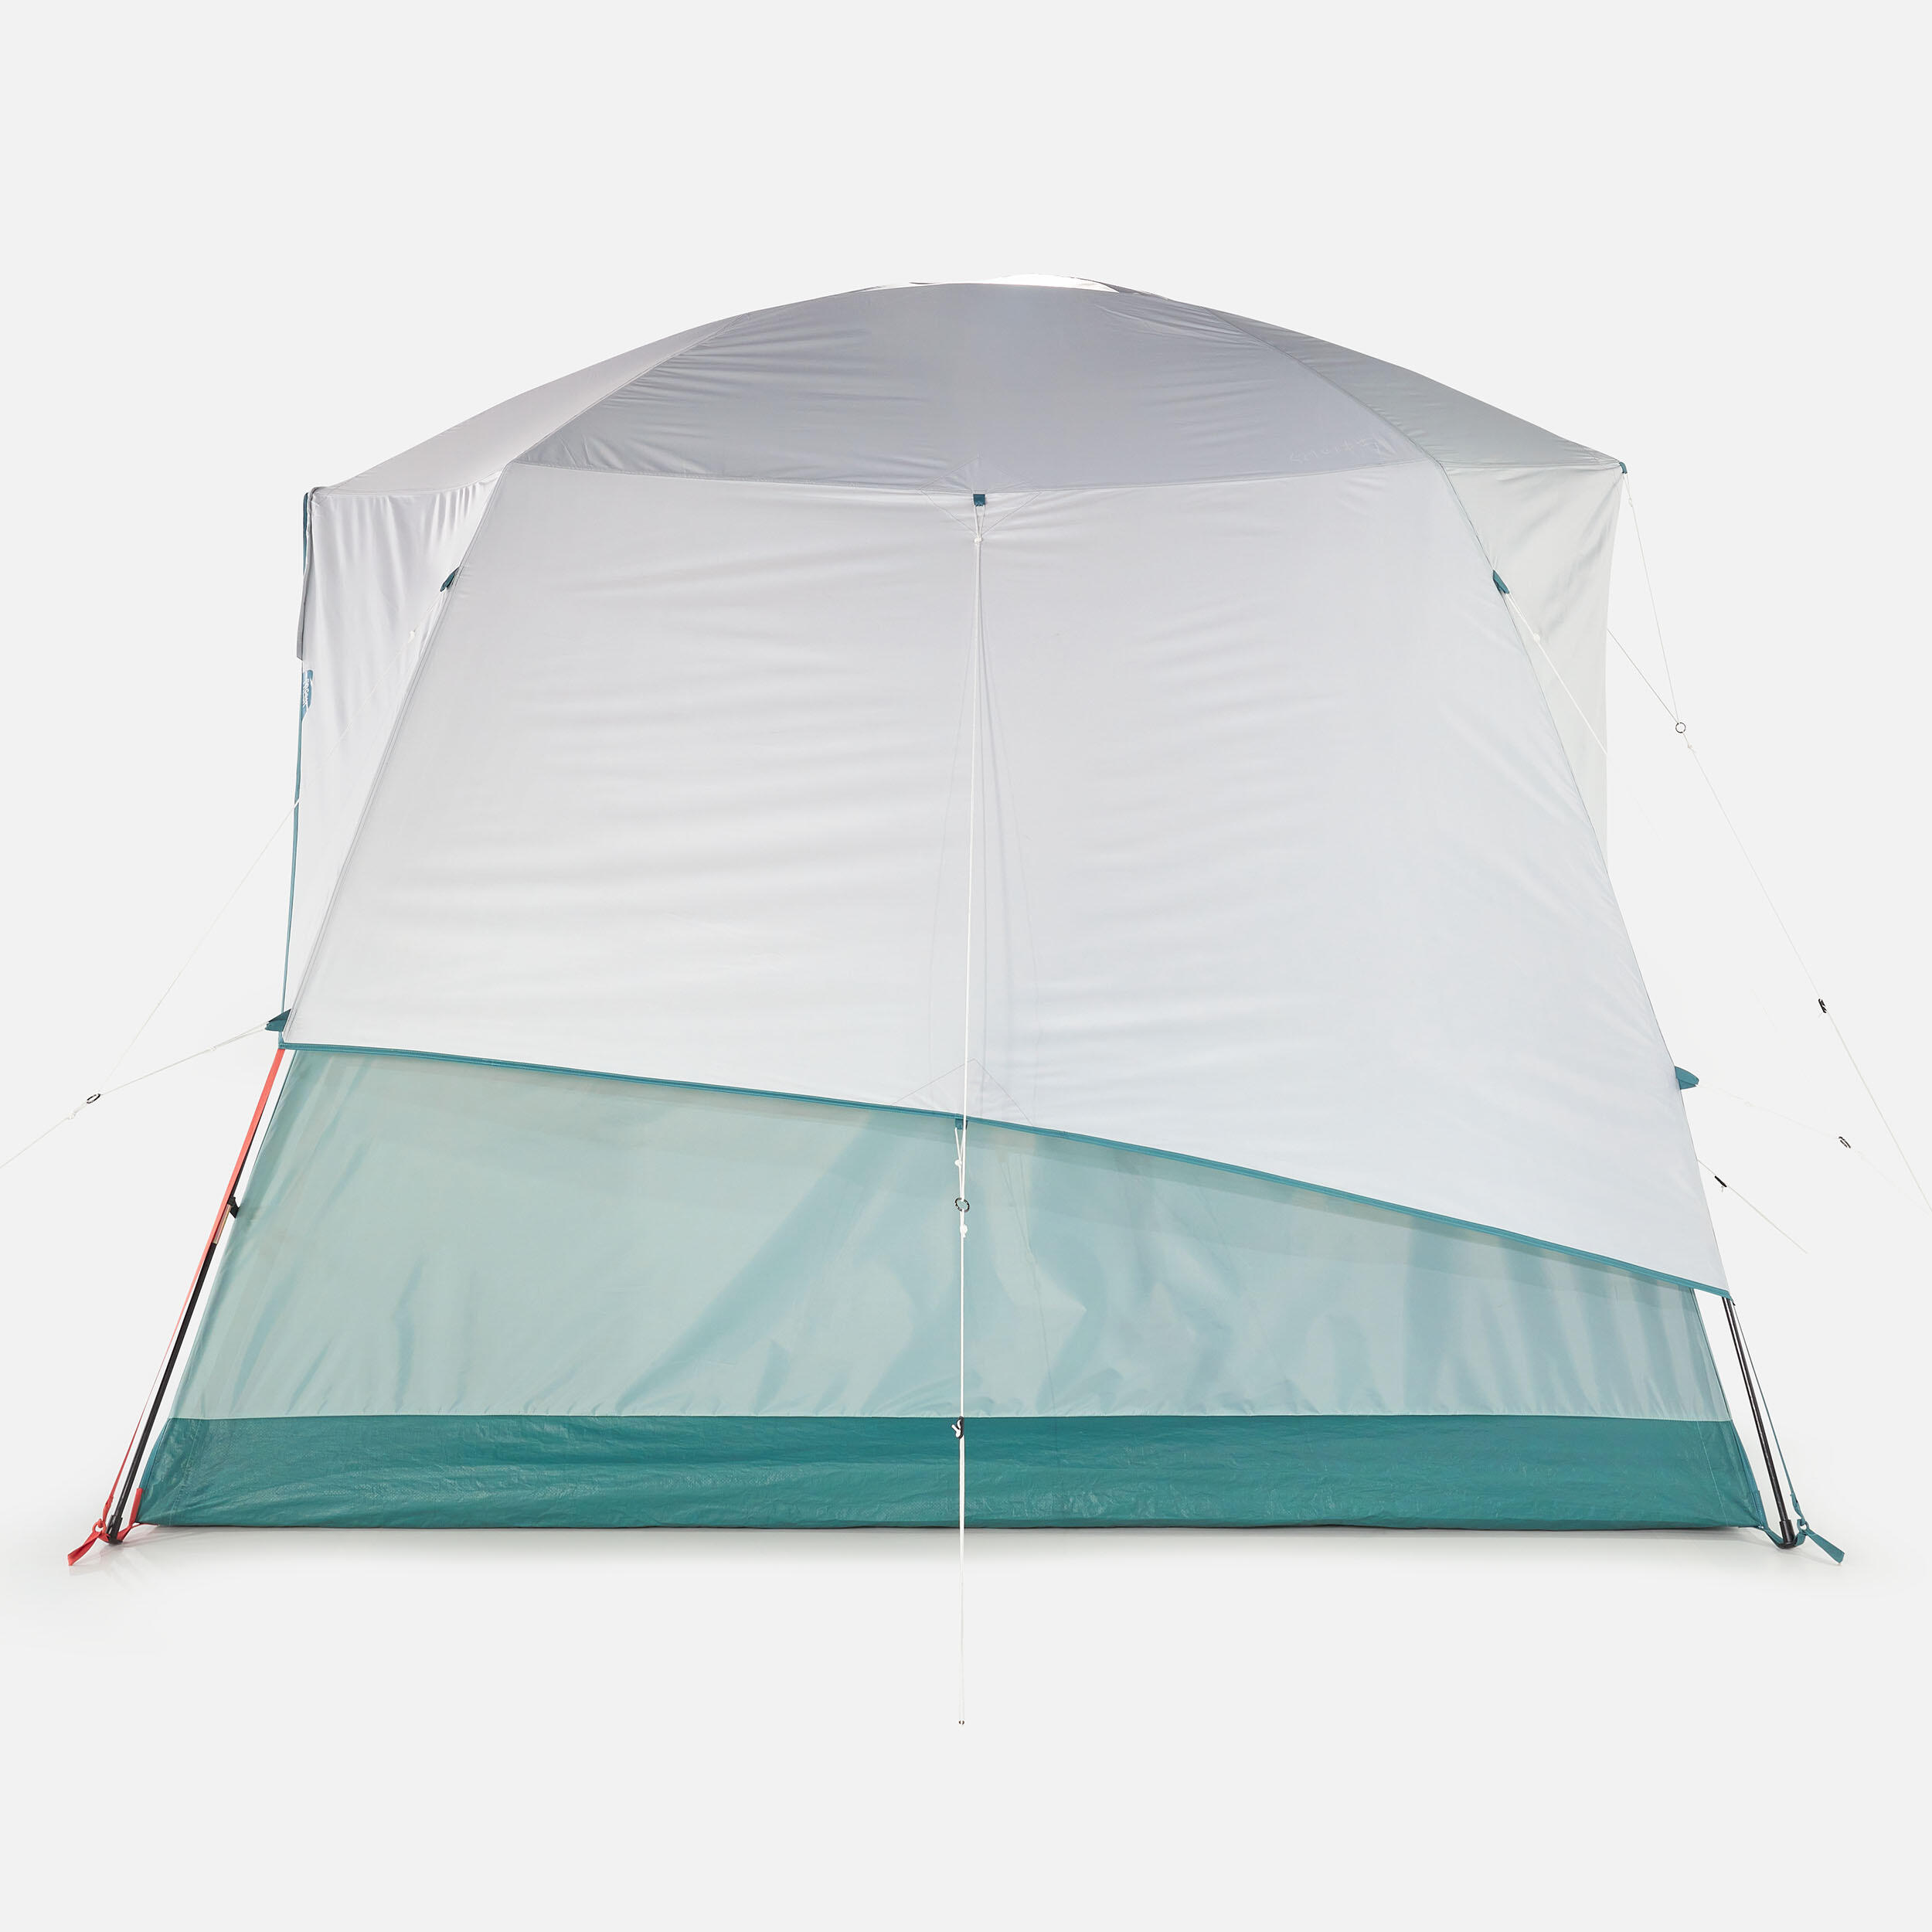 Camping tent with poles - Arpenaz 6 ULTRAFRESH - 6 Person 10/19